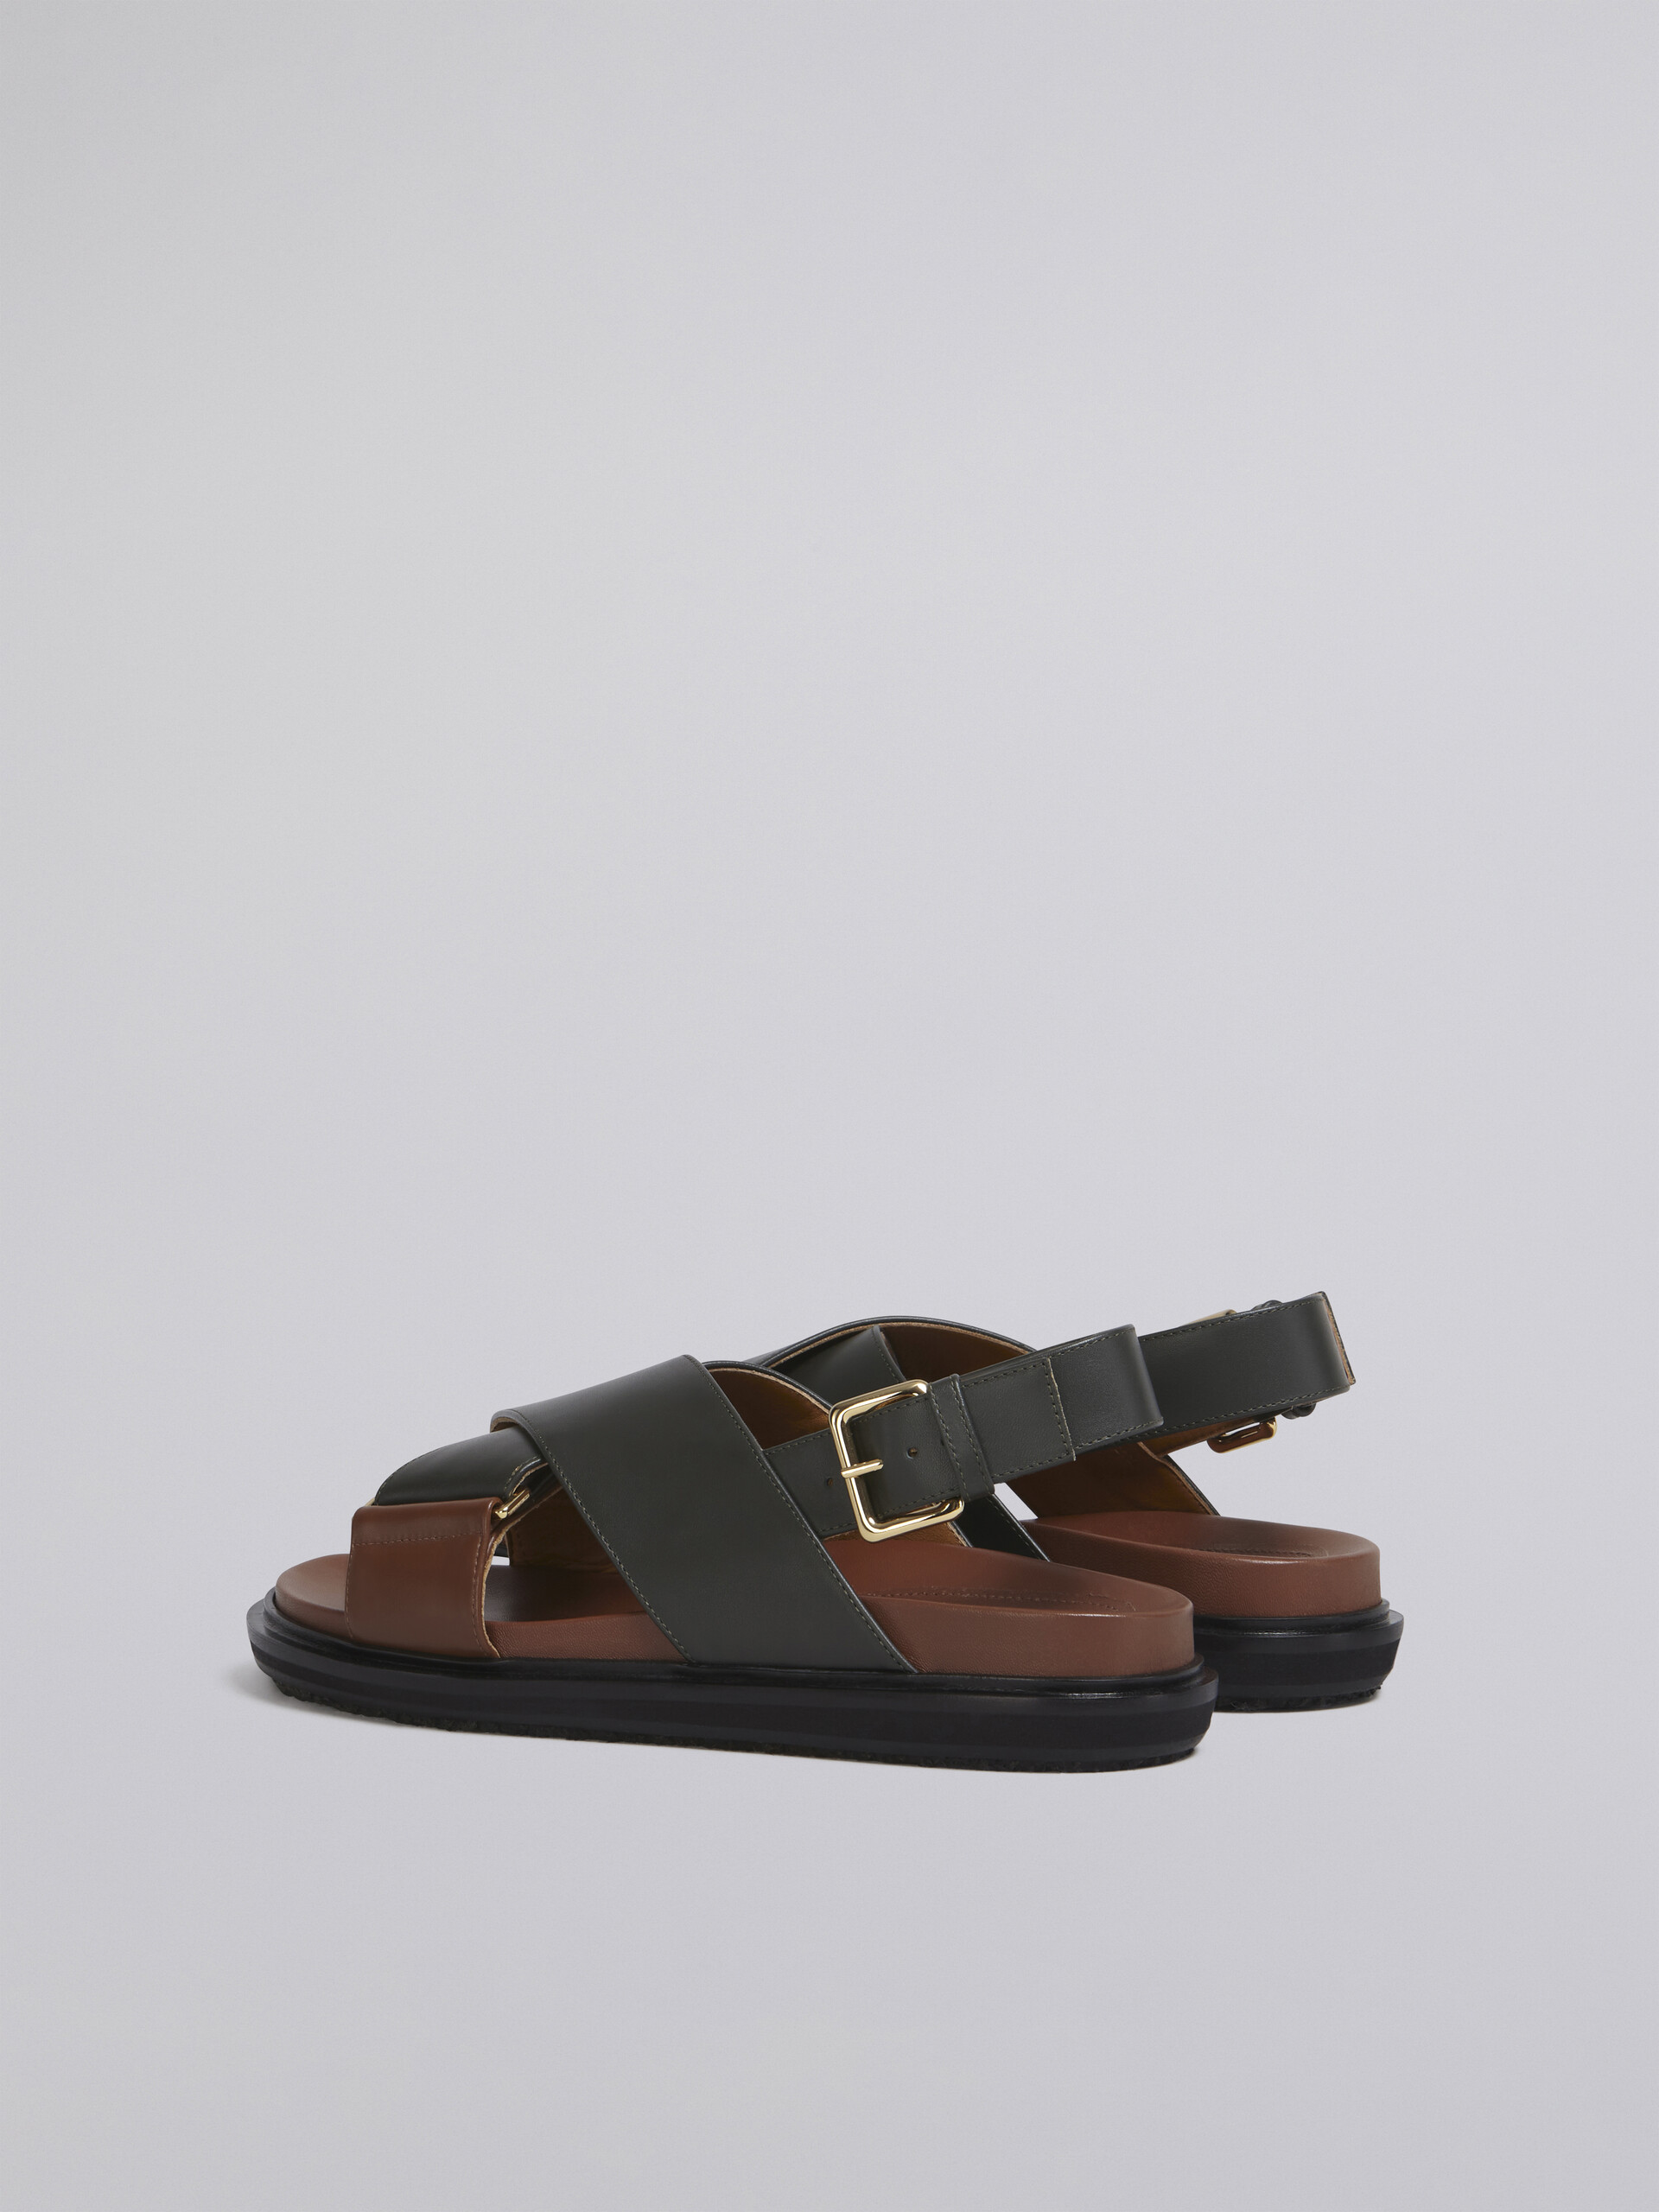 Black and brown leather Fussbett - Sandals - Image 3